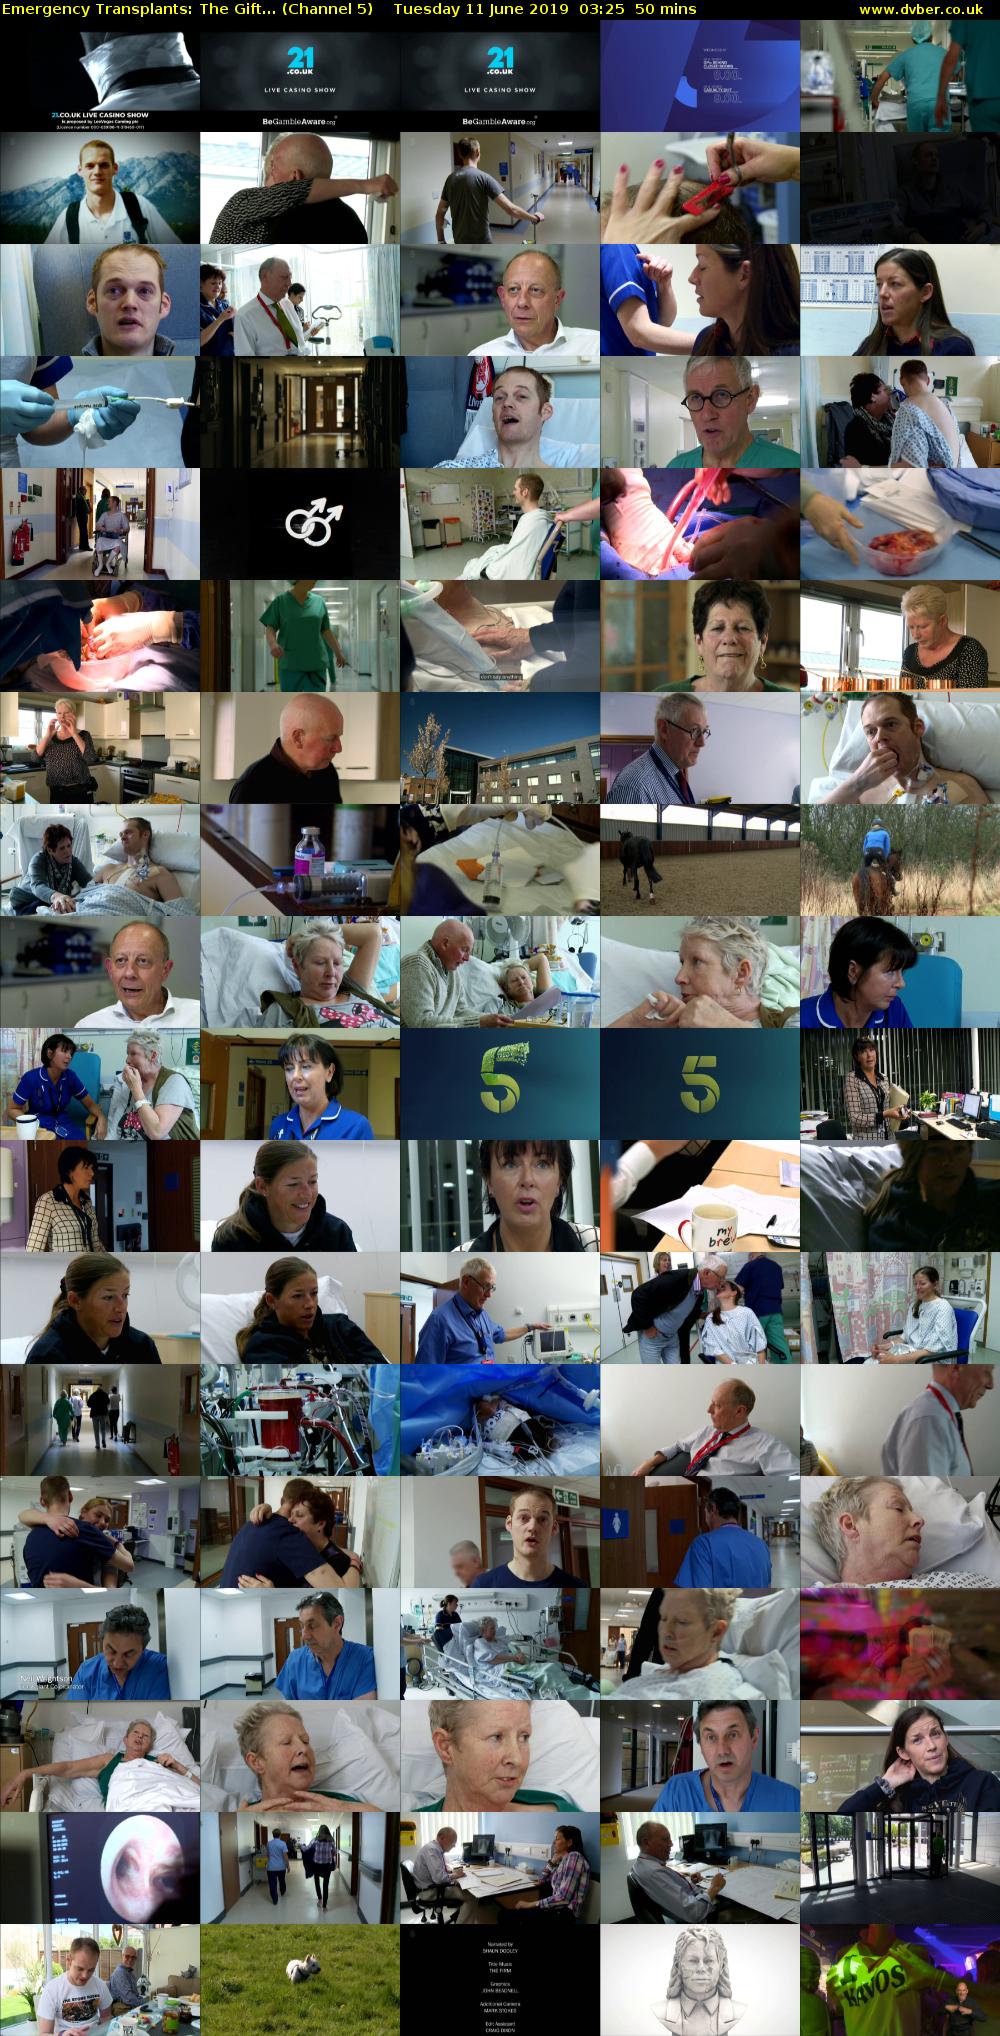 Emergency Transplants: The Gift... (Channel 5) Tuesday 11 June 2019 03:25 - 04:15